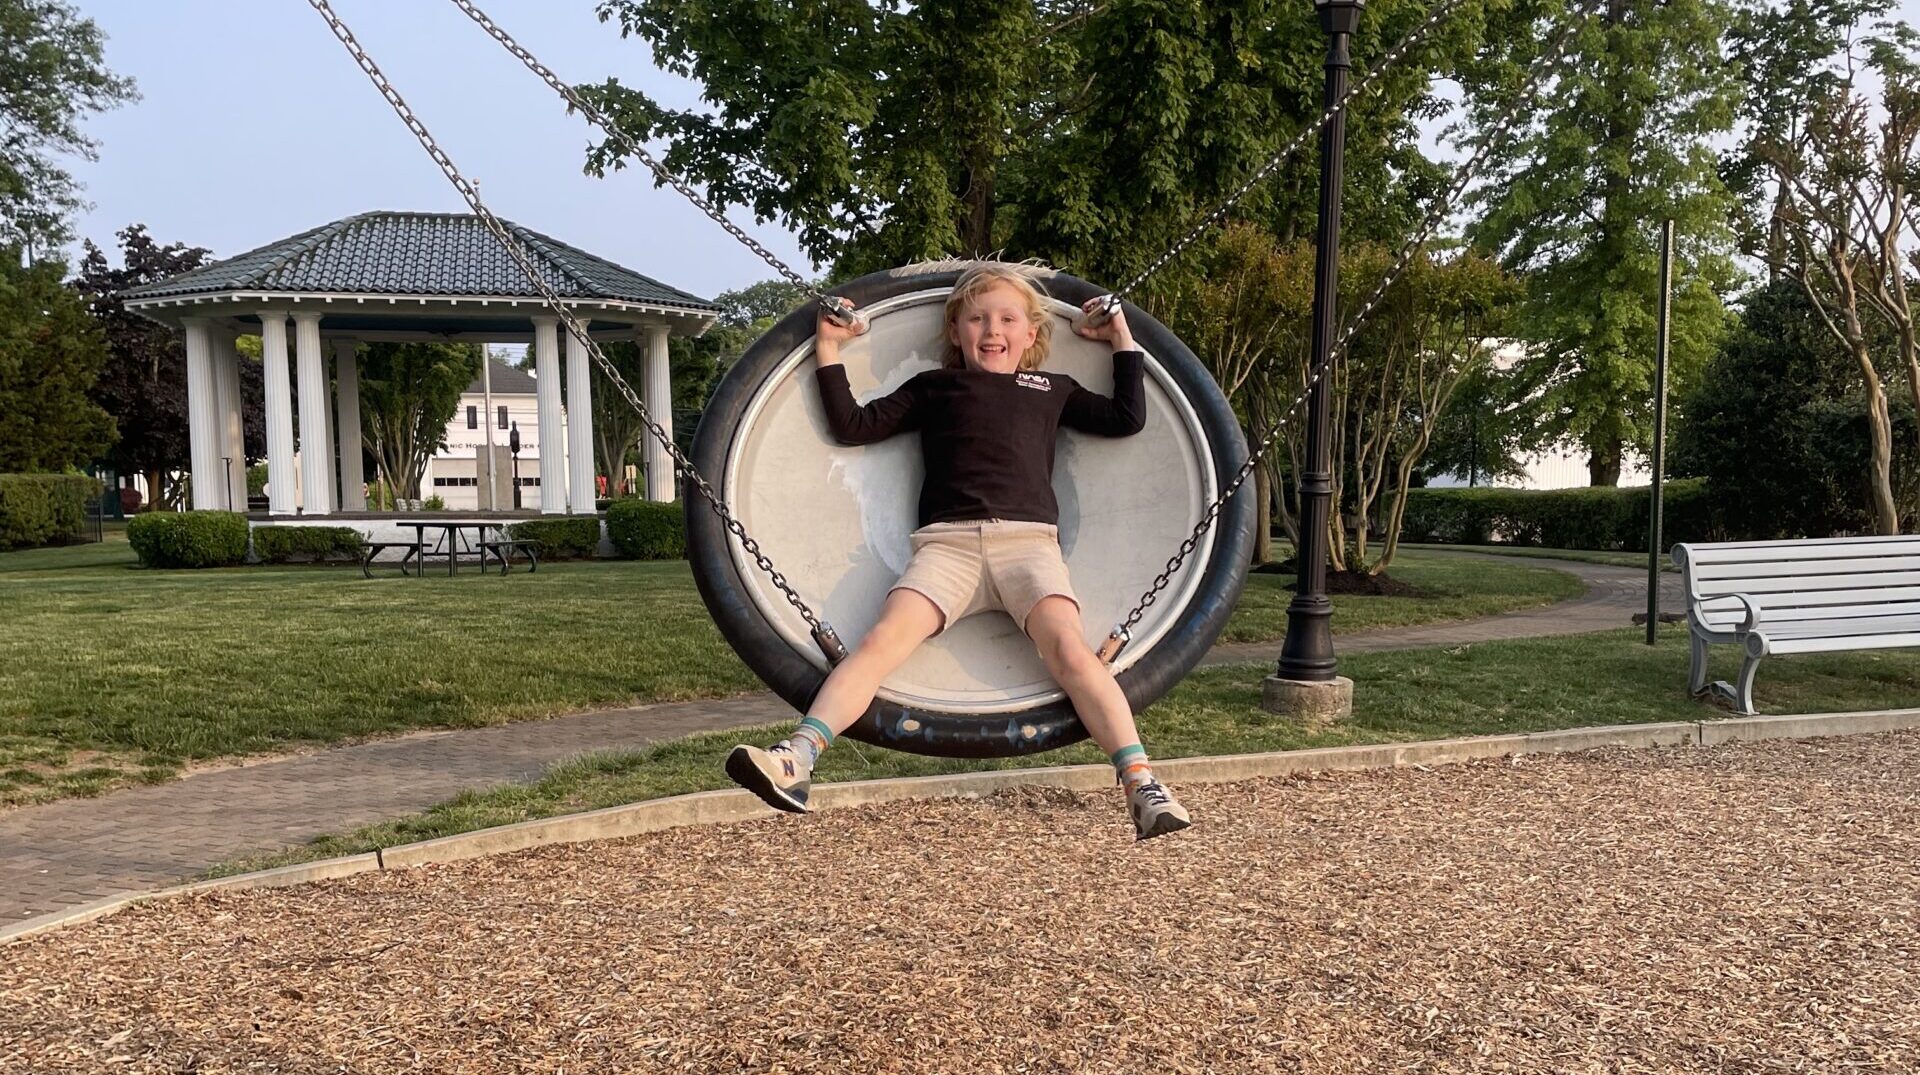 A young boy swings with a big grin on his face.